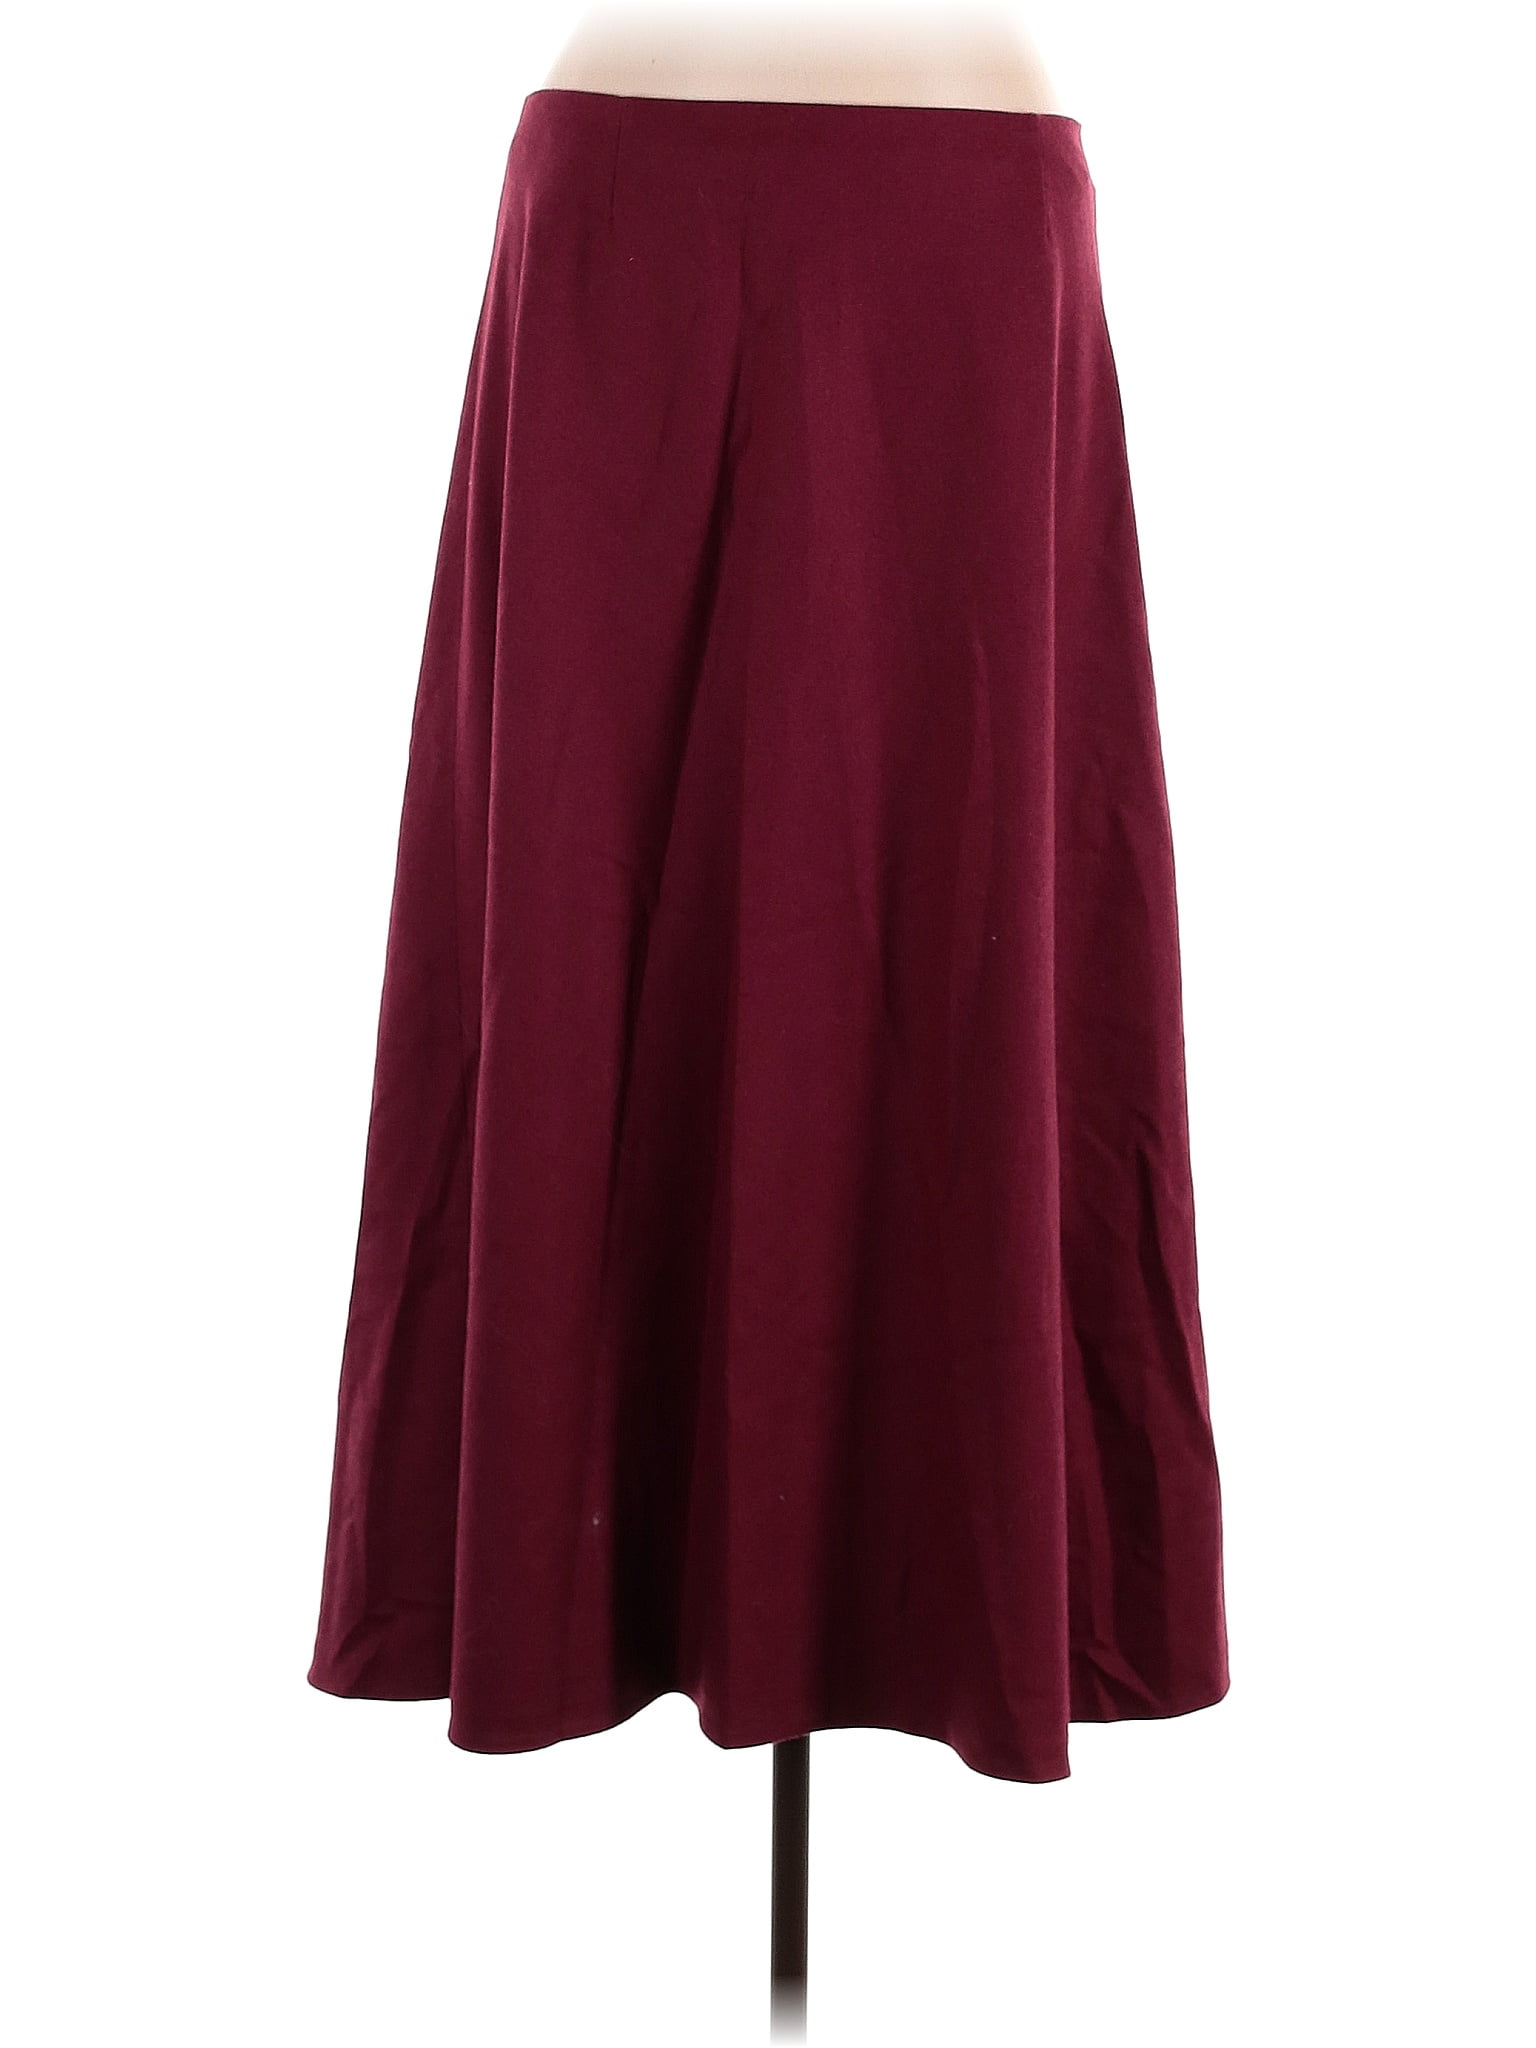 Boden 100% Polyester Solid Maroon Burgundy Casual Skirt Size 12 - 67% ...